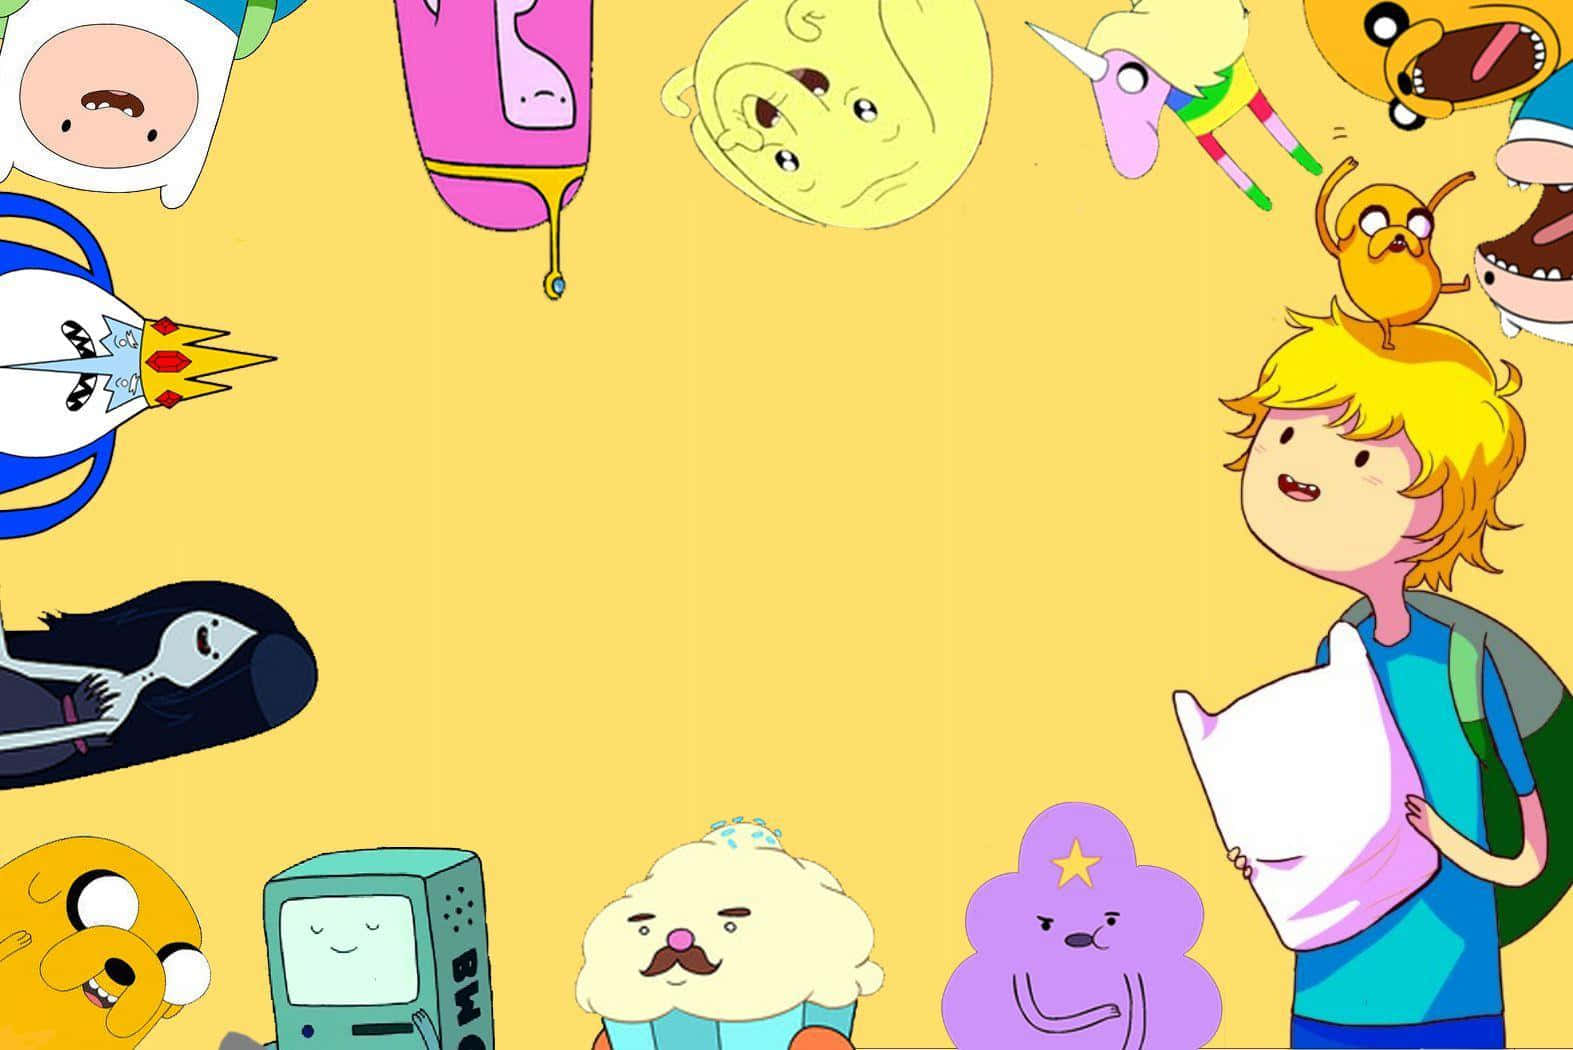 Welcome to the world of Adventure Time!